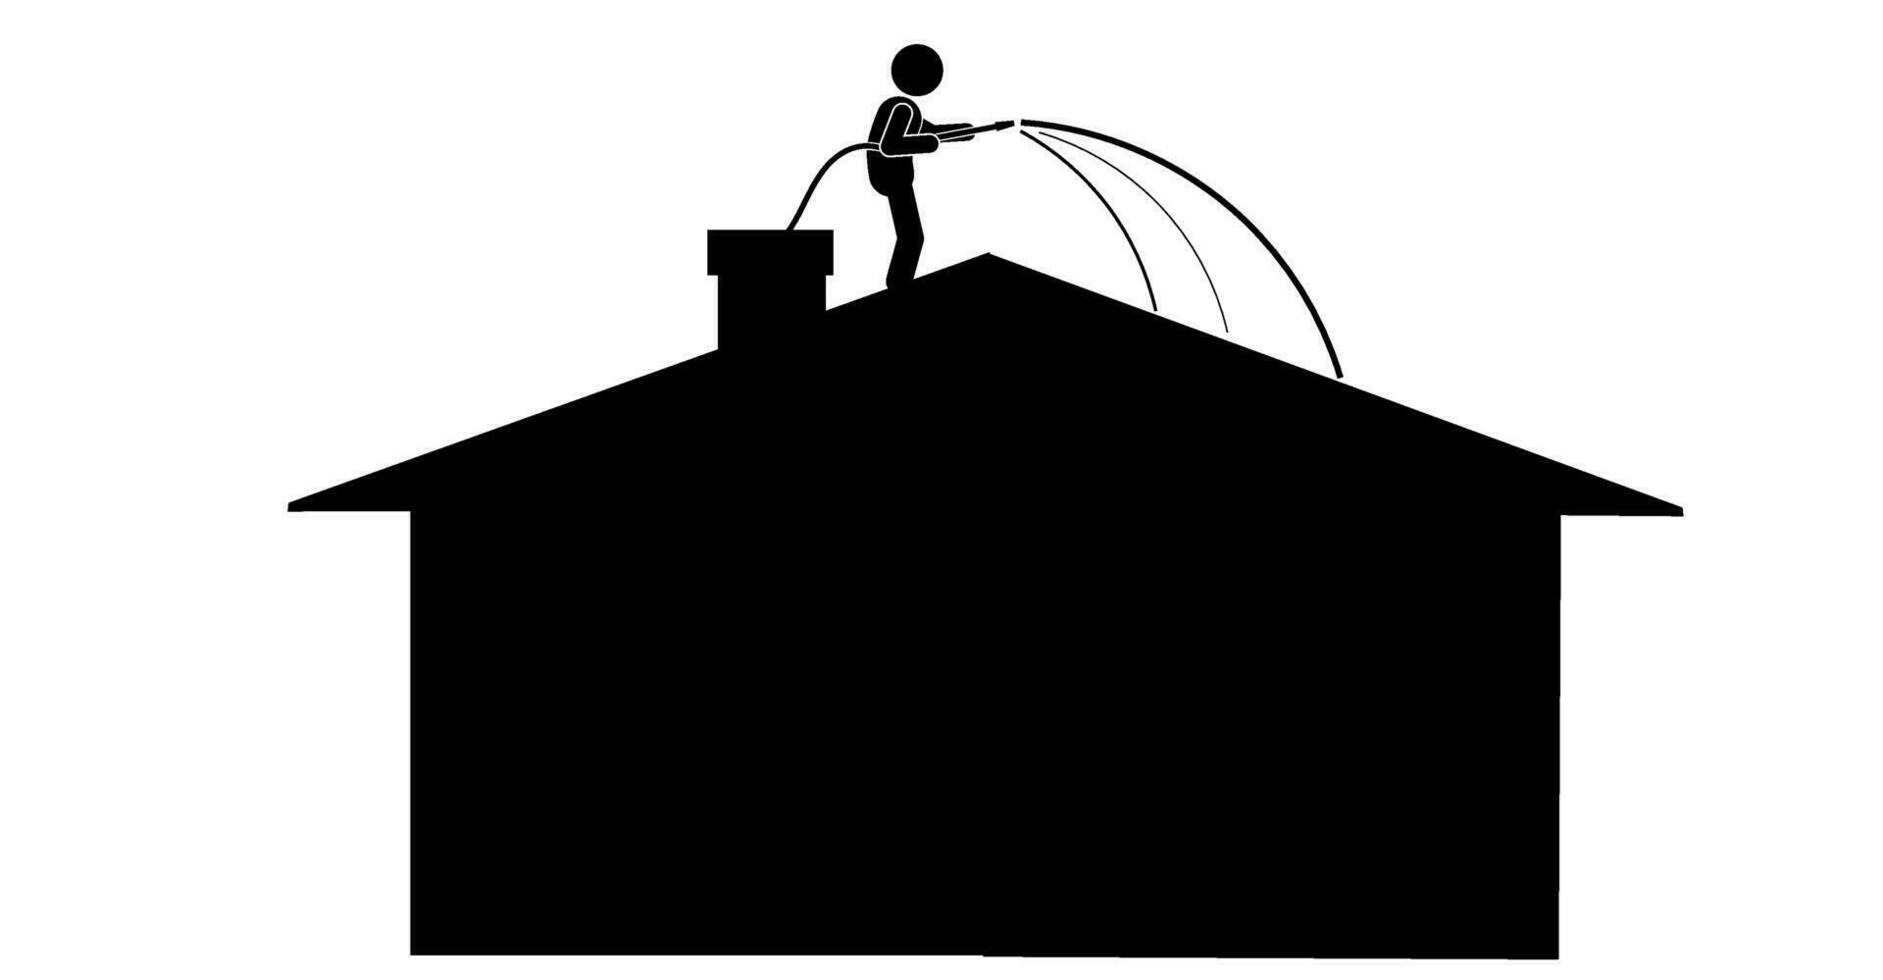 illustration and icon stick figure,stickman,pictogram. cleaning the house, washing the house,cleaning the roof vector